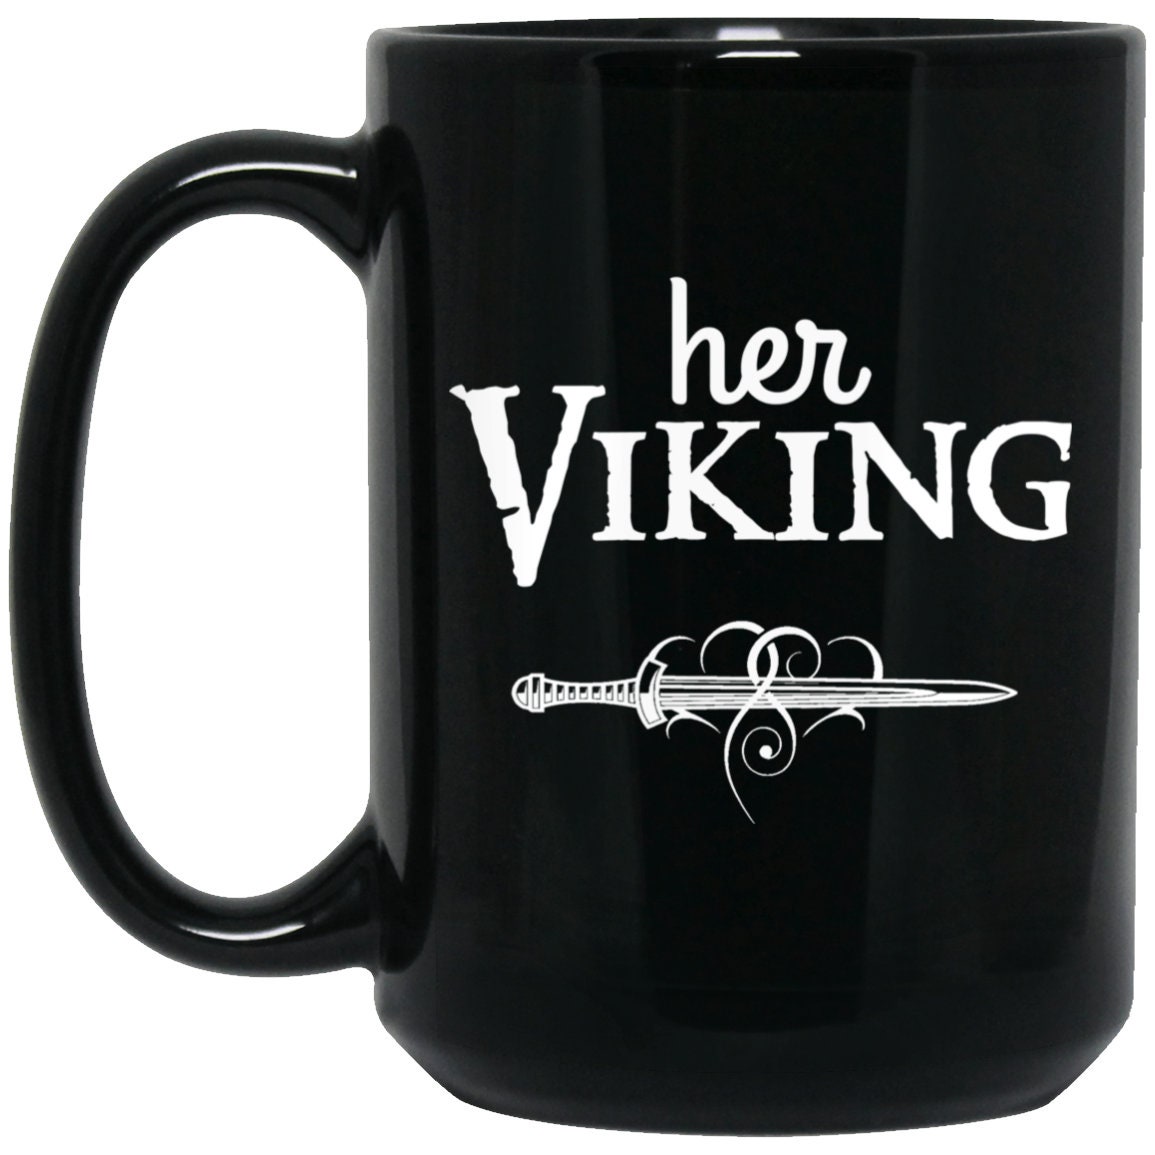 Viking Mug Heart Gifts For Valentine Viking Valentine Couple Matching Mug  Set Viking Mug Allineedis a little bit of coffee a whole lot of Vikings